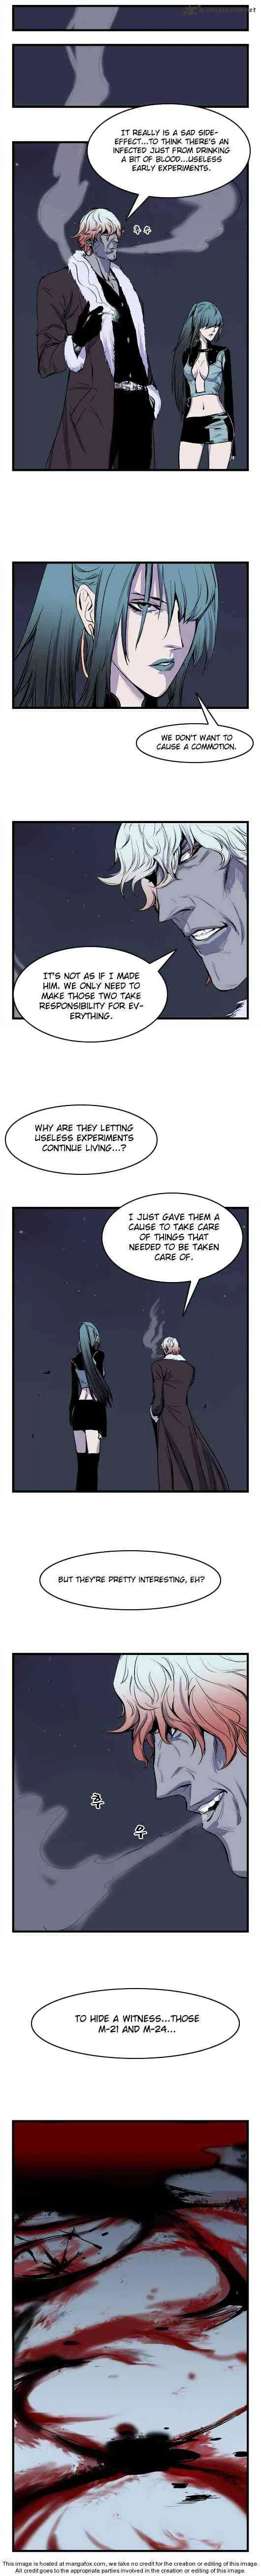 Noblesse Chapter 31 _ Chapters 31-45 page 51